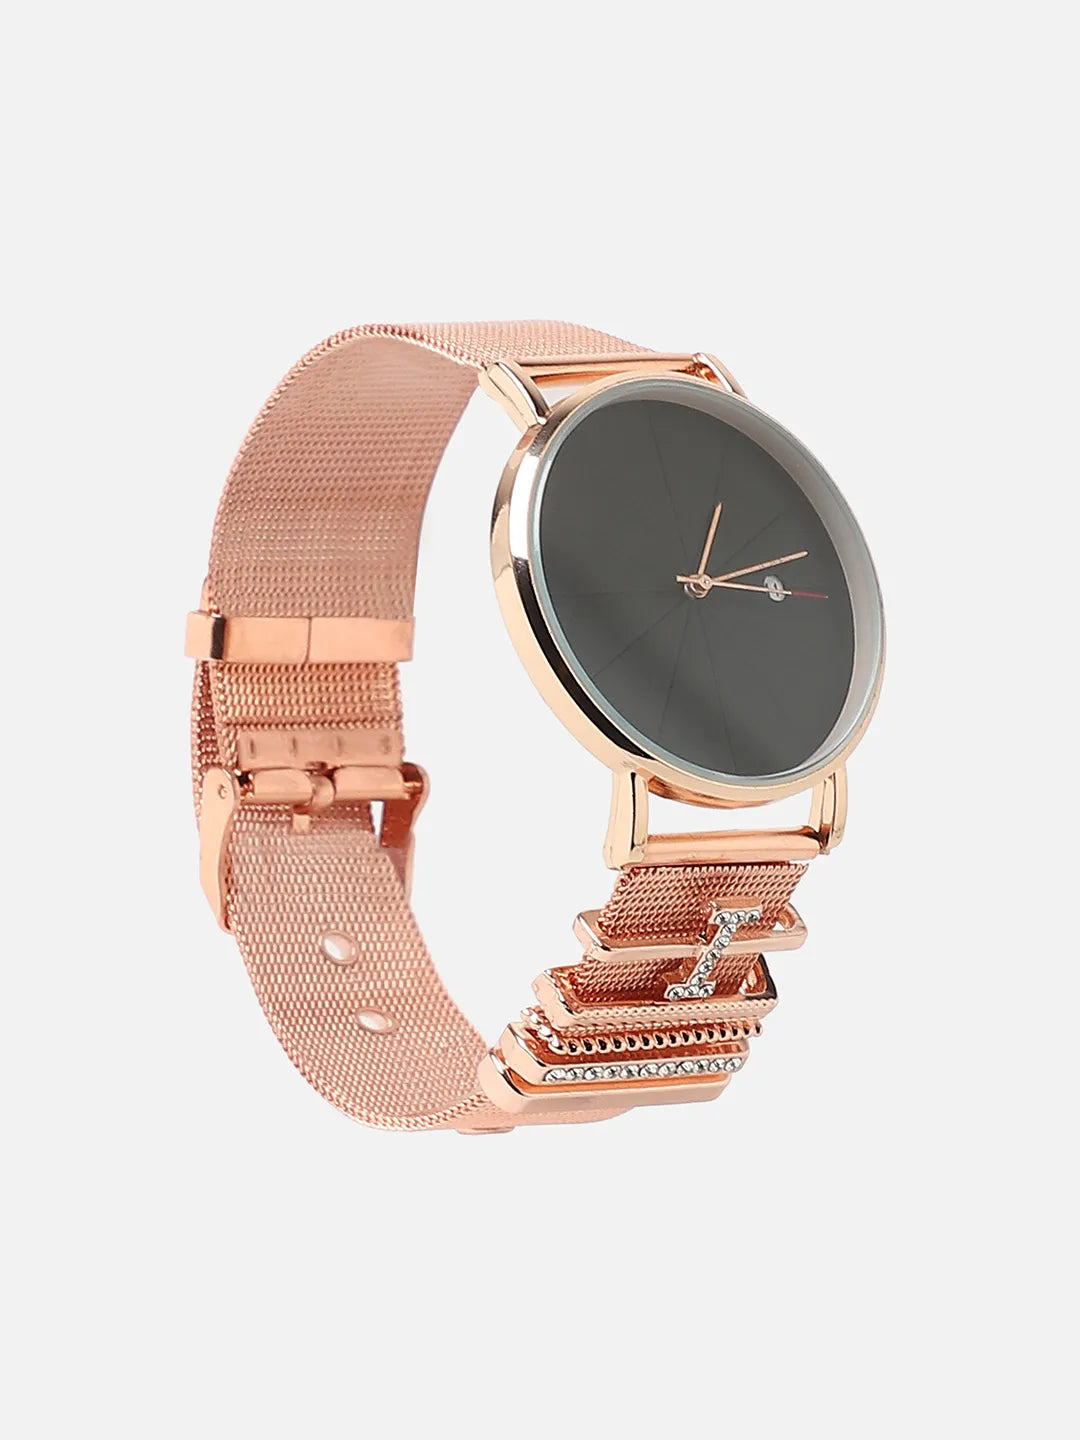 Round Analog Watch With I Initial Watch Charm - Rose Gold